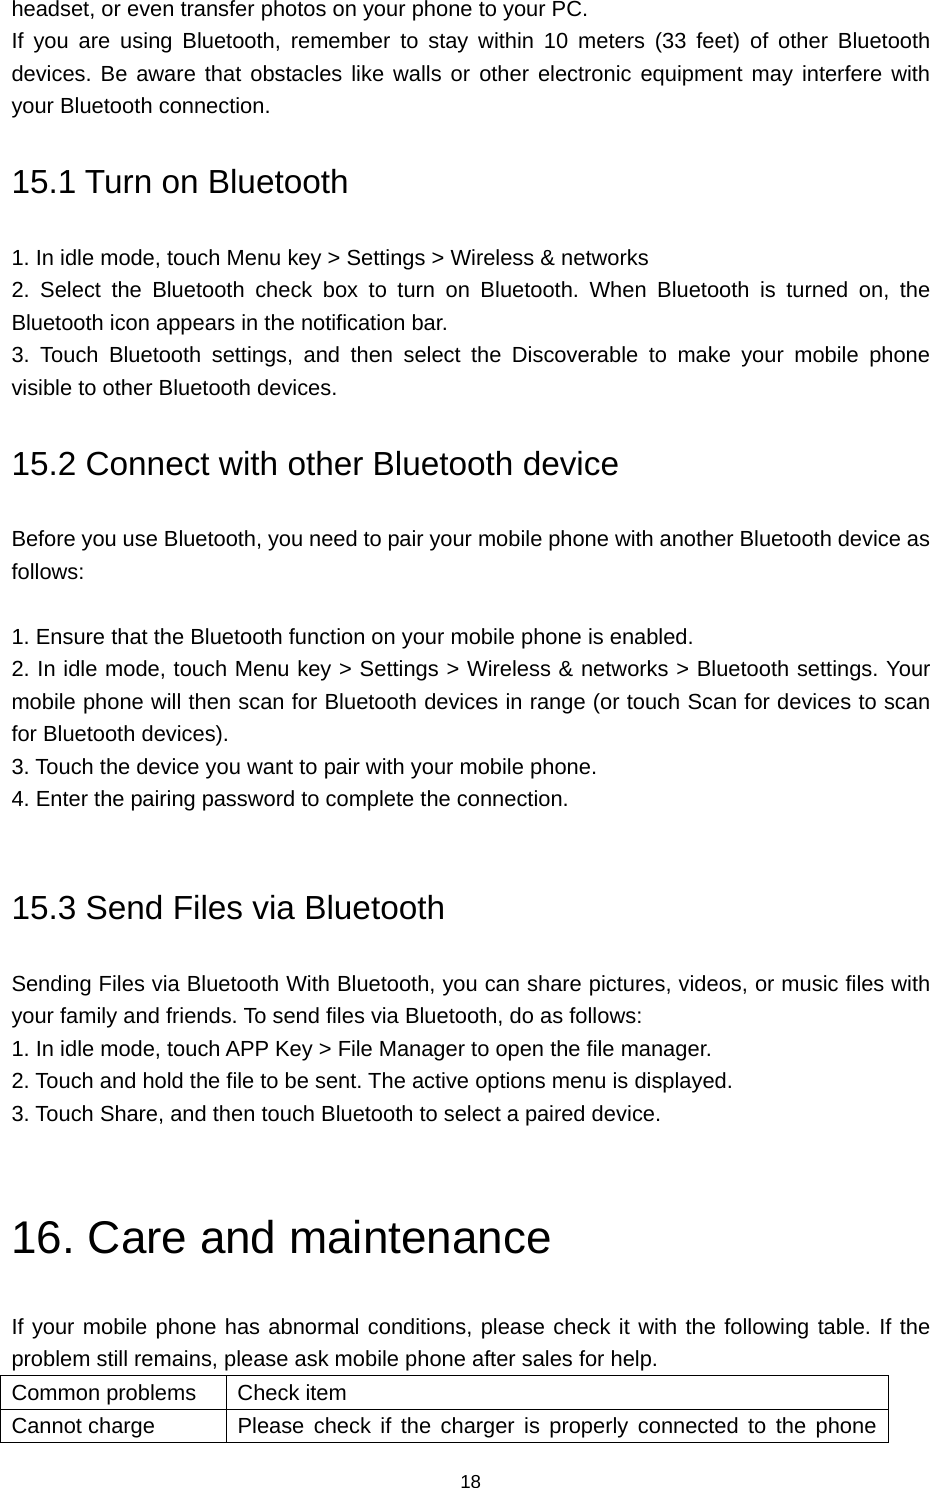 18 headset, or even transfer photos on your phone to your PC.   If you are using Bluetooth, remember to stay within 10 meters (33 feet) of other Bluetooth devices. Be aware that obstacles like walls or other electronic equipment may interfere with your Bluetooth connection. 15.1 Turn on Bluetooth   1. In idle mode, touch Menu key &gt; Settings &gt; Wireless &amp; networks       2. Select the Bluetooth check box to turn on Bluetooth. When Bluetooth is turned on, the Bluetooth icon appears in the notification bar.   3. Touch Bluetooth settings, and then select the Discoverable to make your mobile phone visible to other Bluetooth devices.   15.2 Connect with other Bluetooth device Before you use Bluetooth, you need to pair your mobile phone with another Bluetooth device as follows:  1. Ensure that the Bluetooth function on your mobile phone is enabled.   2. In idle mode, touch Menu key &gt; Settings &gt; Wireless &amp; networks &gt; Bluetooth settings. Your mobile phone will then scan for Bluetooth devices in range (or touch Scan for devices to scan for Bluetooth devices).   3. Touch the device you want to pair with your mobile phone.   4. Enter the pairing password to complete the connection.    15.3 Send Files via Bluetooth Sending Files via Bluetooth With Bluetooth, you can share pictures, videos, or music files with your family and friends. To send files via Bluetooth, do as follows:   1. In idle mode, touch APP Key &gt; File Manager to open the file manager.   2. Touch and hold the file to be sent. The active options menu is displayed.   3. Touch Share, and then touch Bluetooth to select a paired device.  16. Care and maintenance If your mobile phone has abnormal conditions, please check it with the following table. If the problem still remains, please ask mobile phone after sales for help. Common problems  Check item Cannot charge  Please check if the charger is properly connected to the phone 